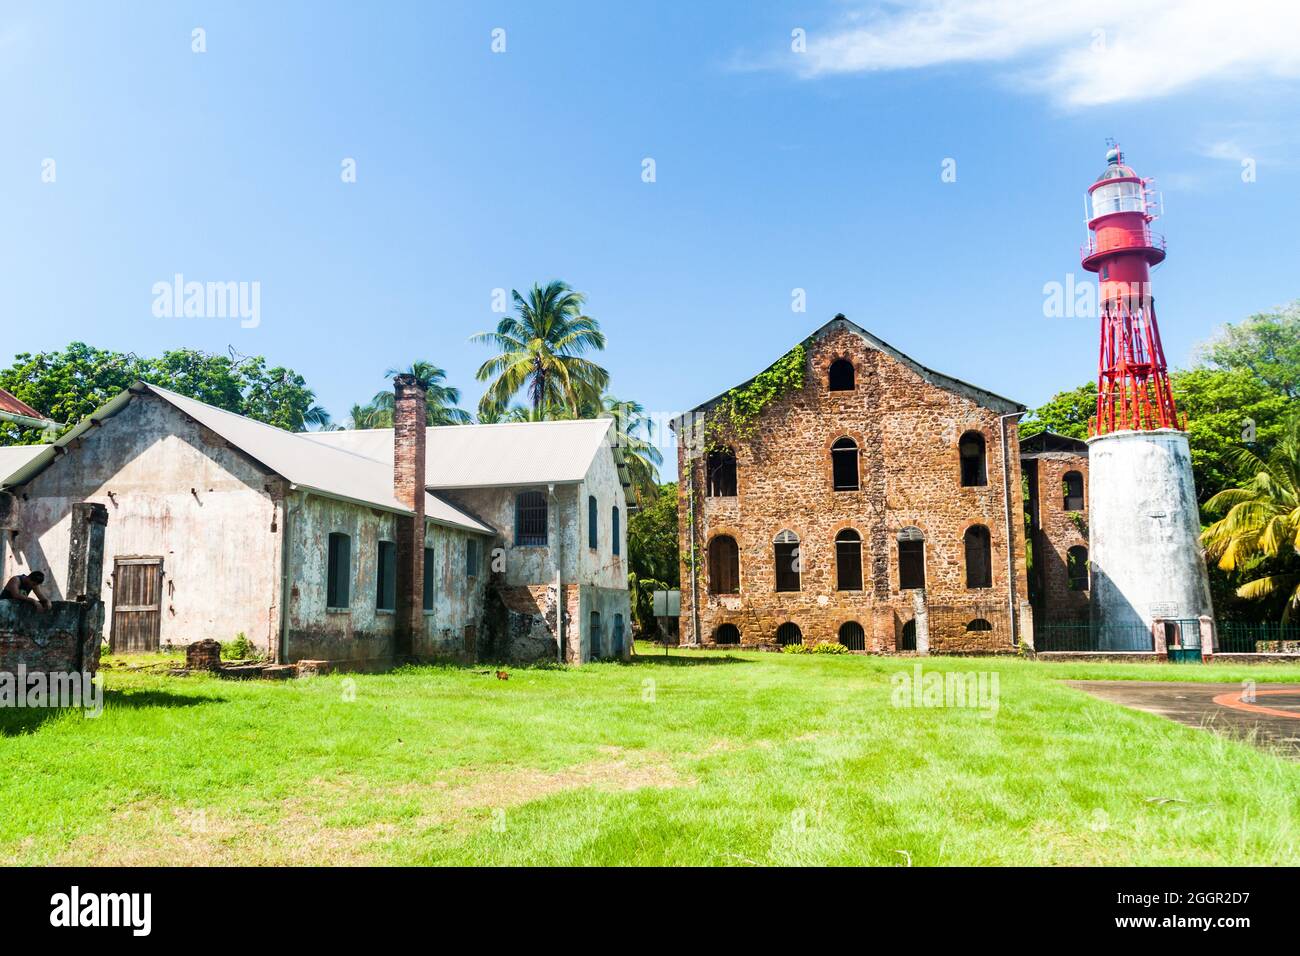 Buildings of former penal colony at Ile Royale, one of the islands of Iles du Salut (Islands of Salvation) in French Guiana Stock Photo